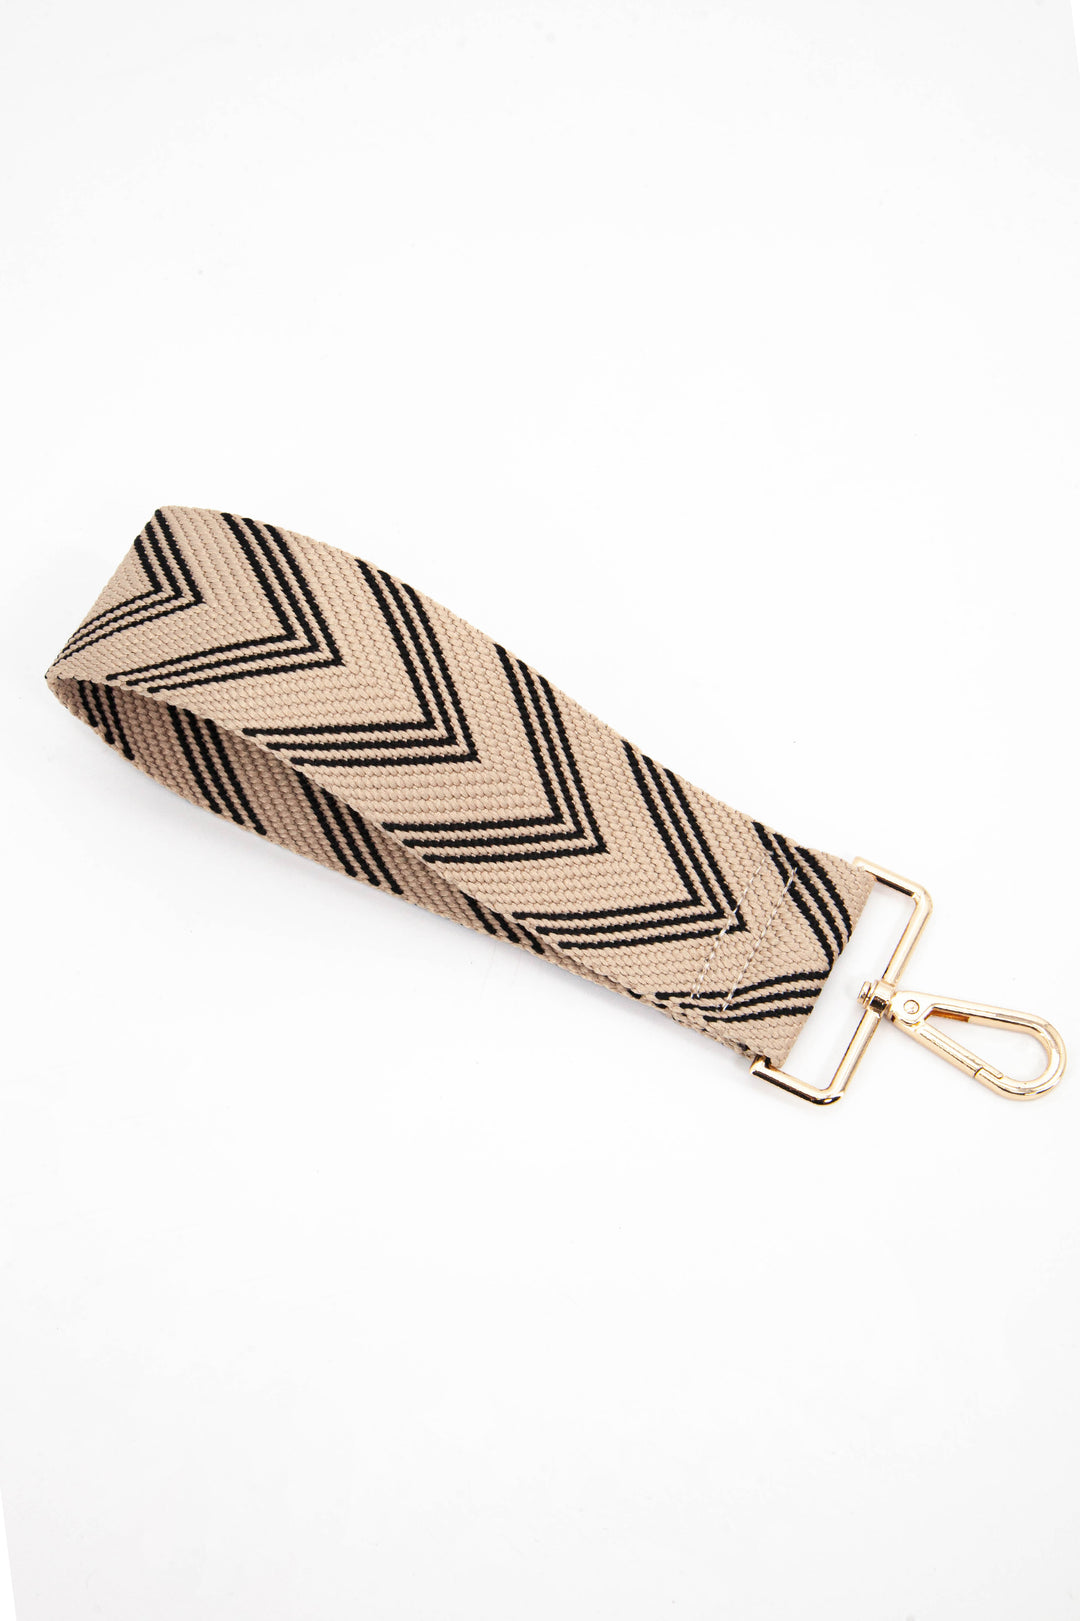 beige and navy blue chevron striped woven clip on wrist strap with gold hardware